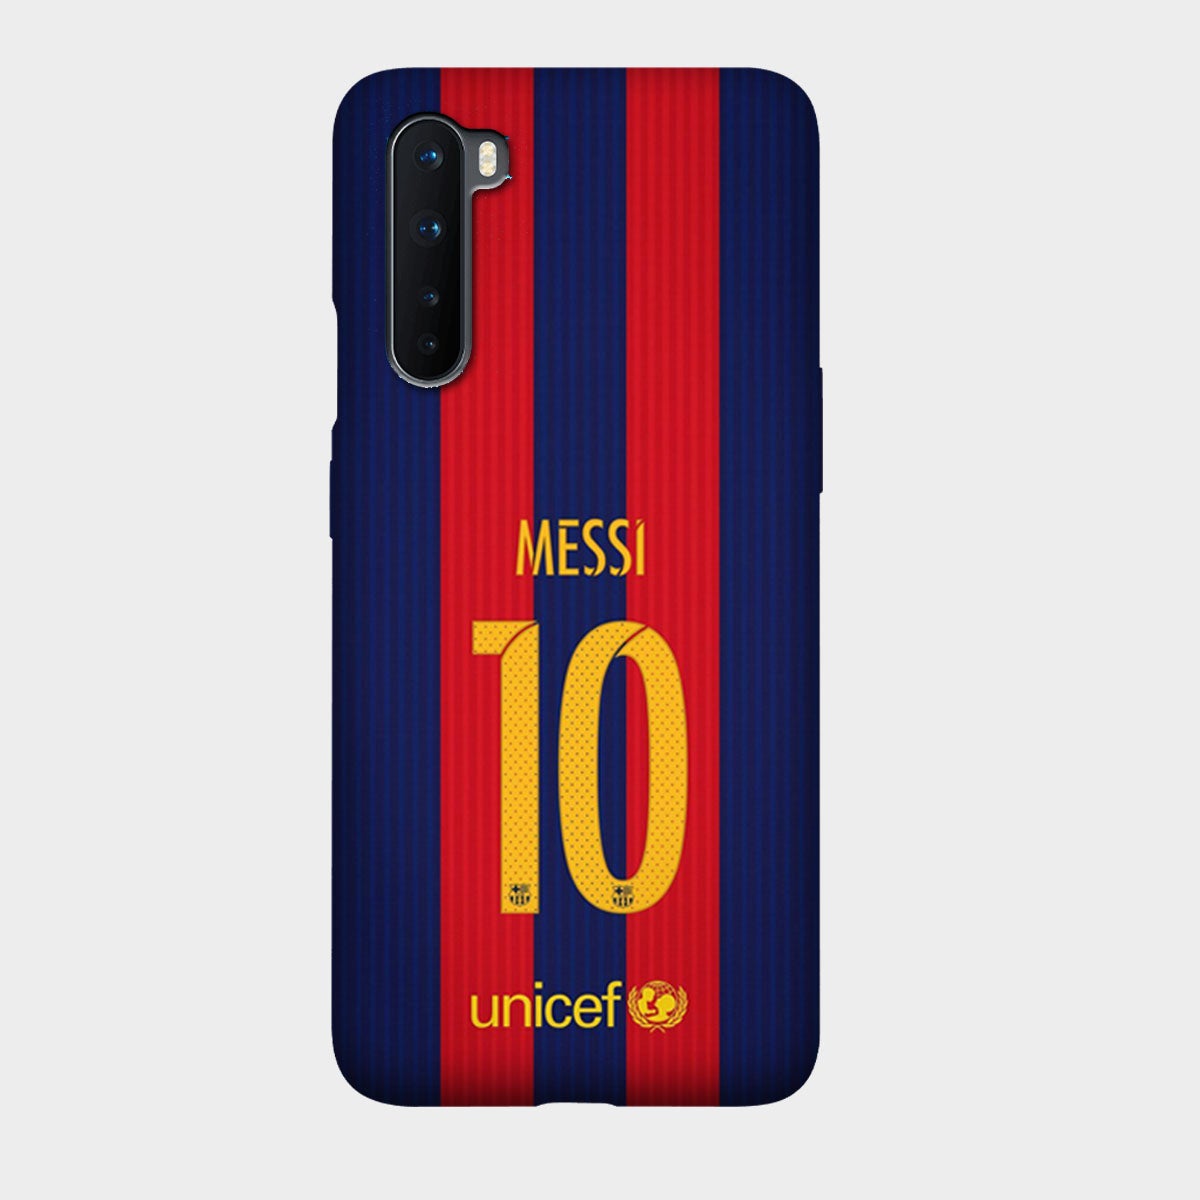 Lionel Messi Shirt - FC Barcelona - Mobile Phone Cover - Hard Case - OnePlus